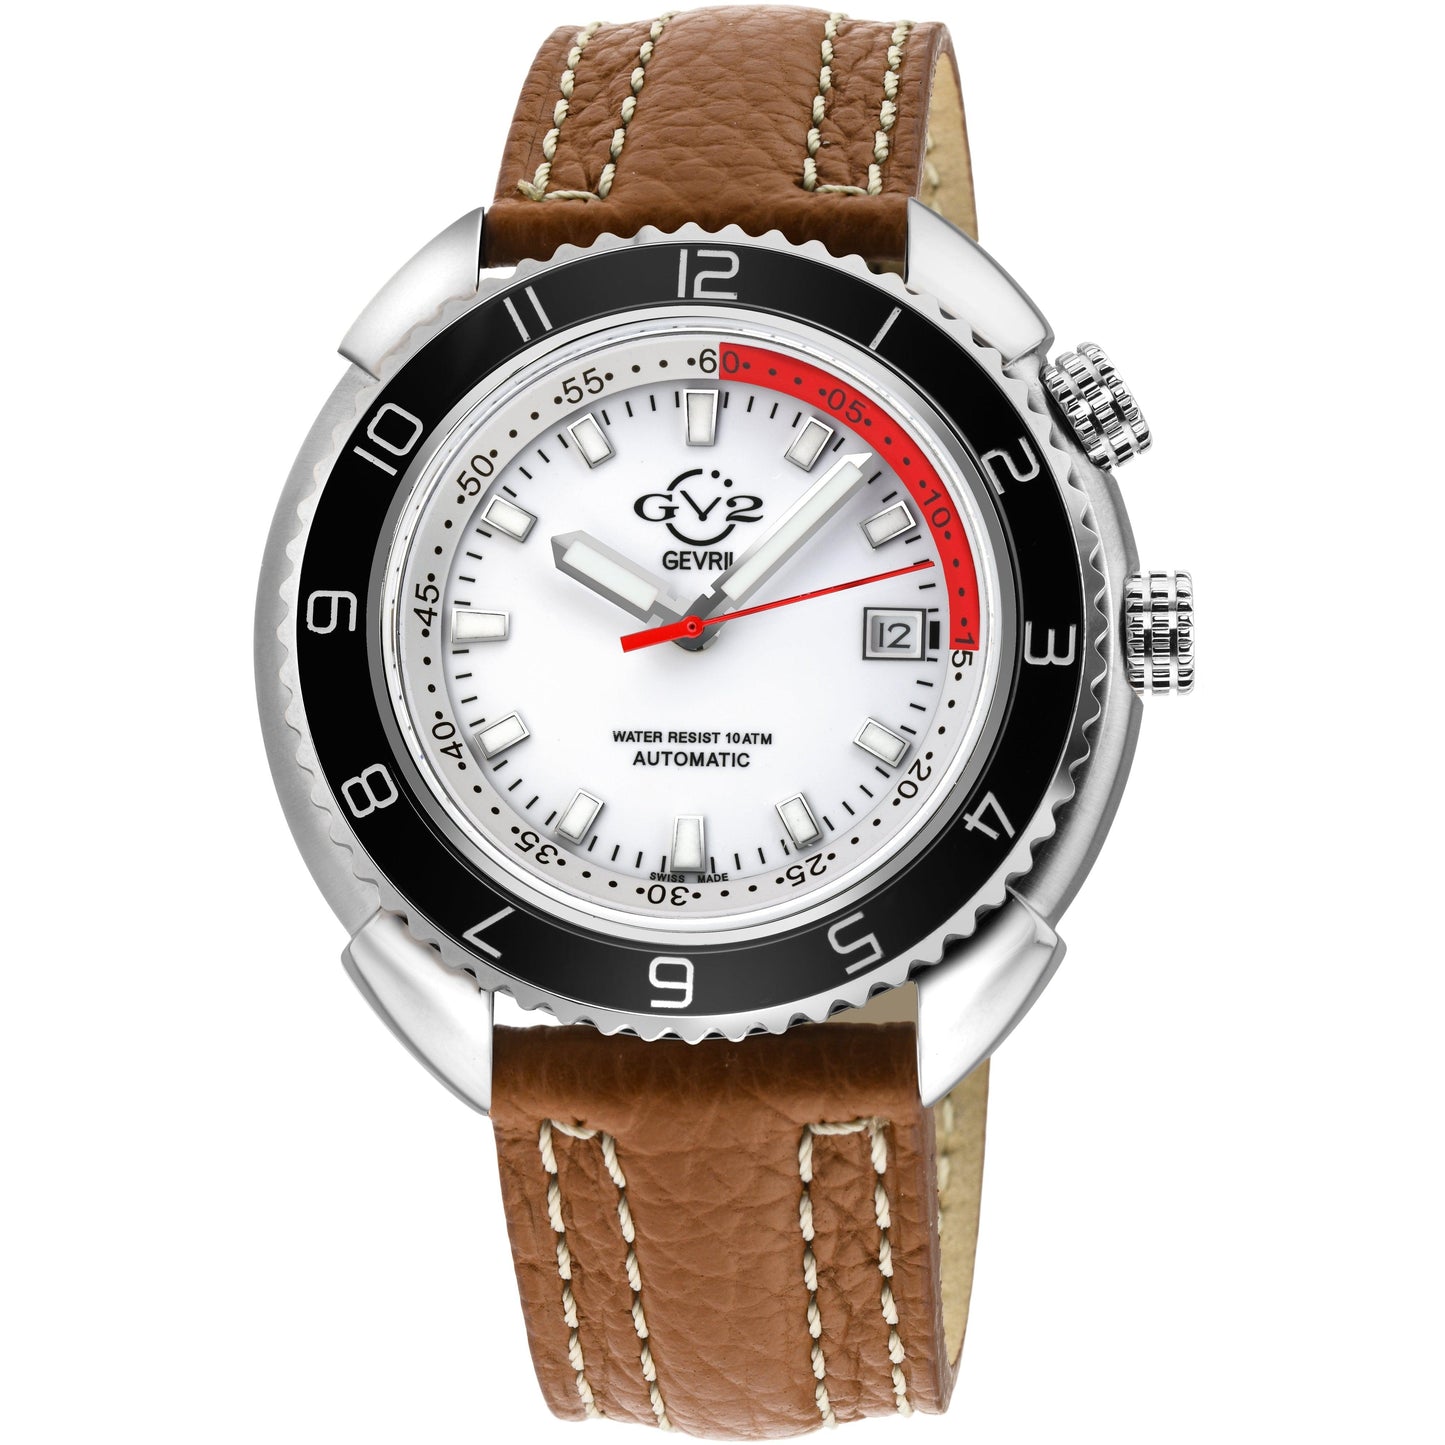 Gevril-Luxury-Swiss-Watches-GV2 Squalo-42400.L5